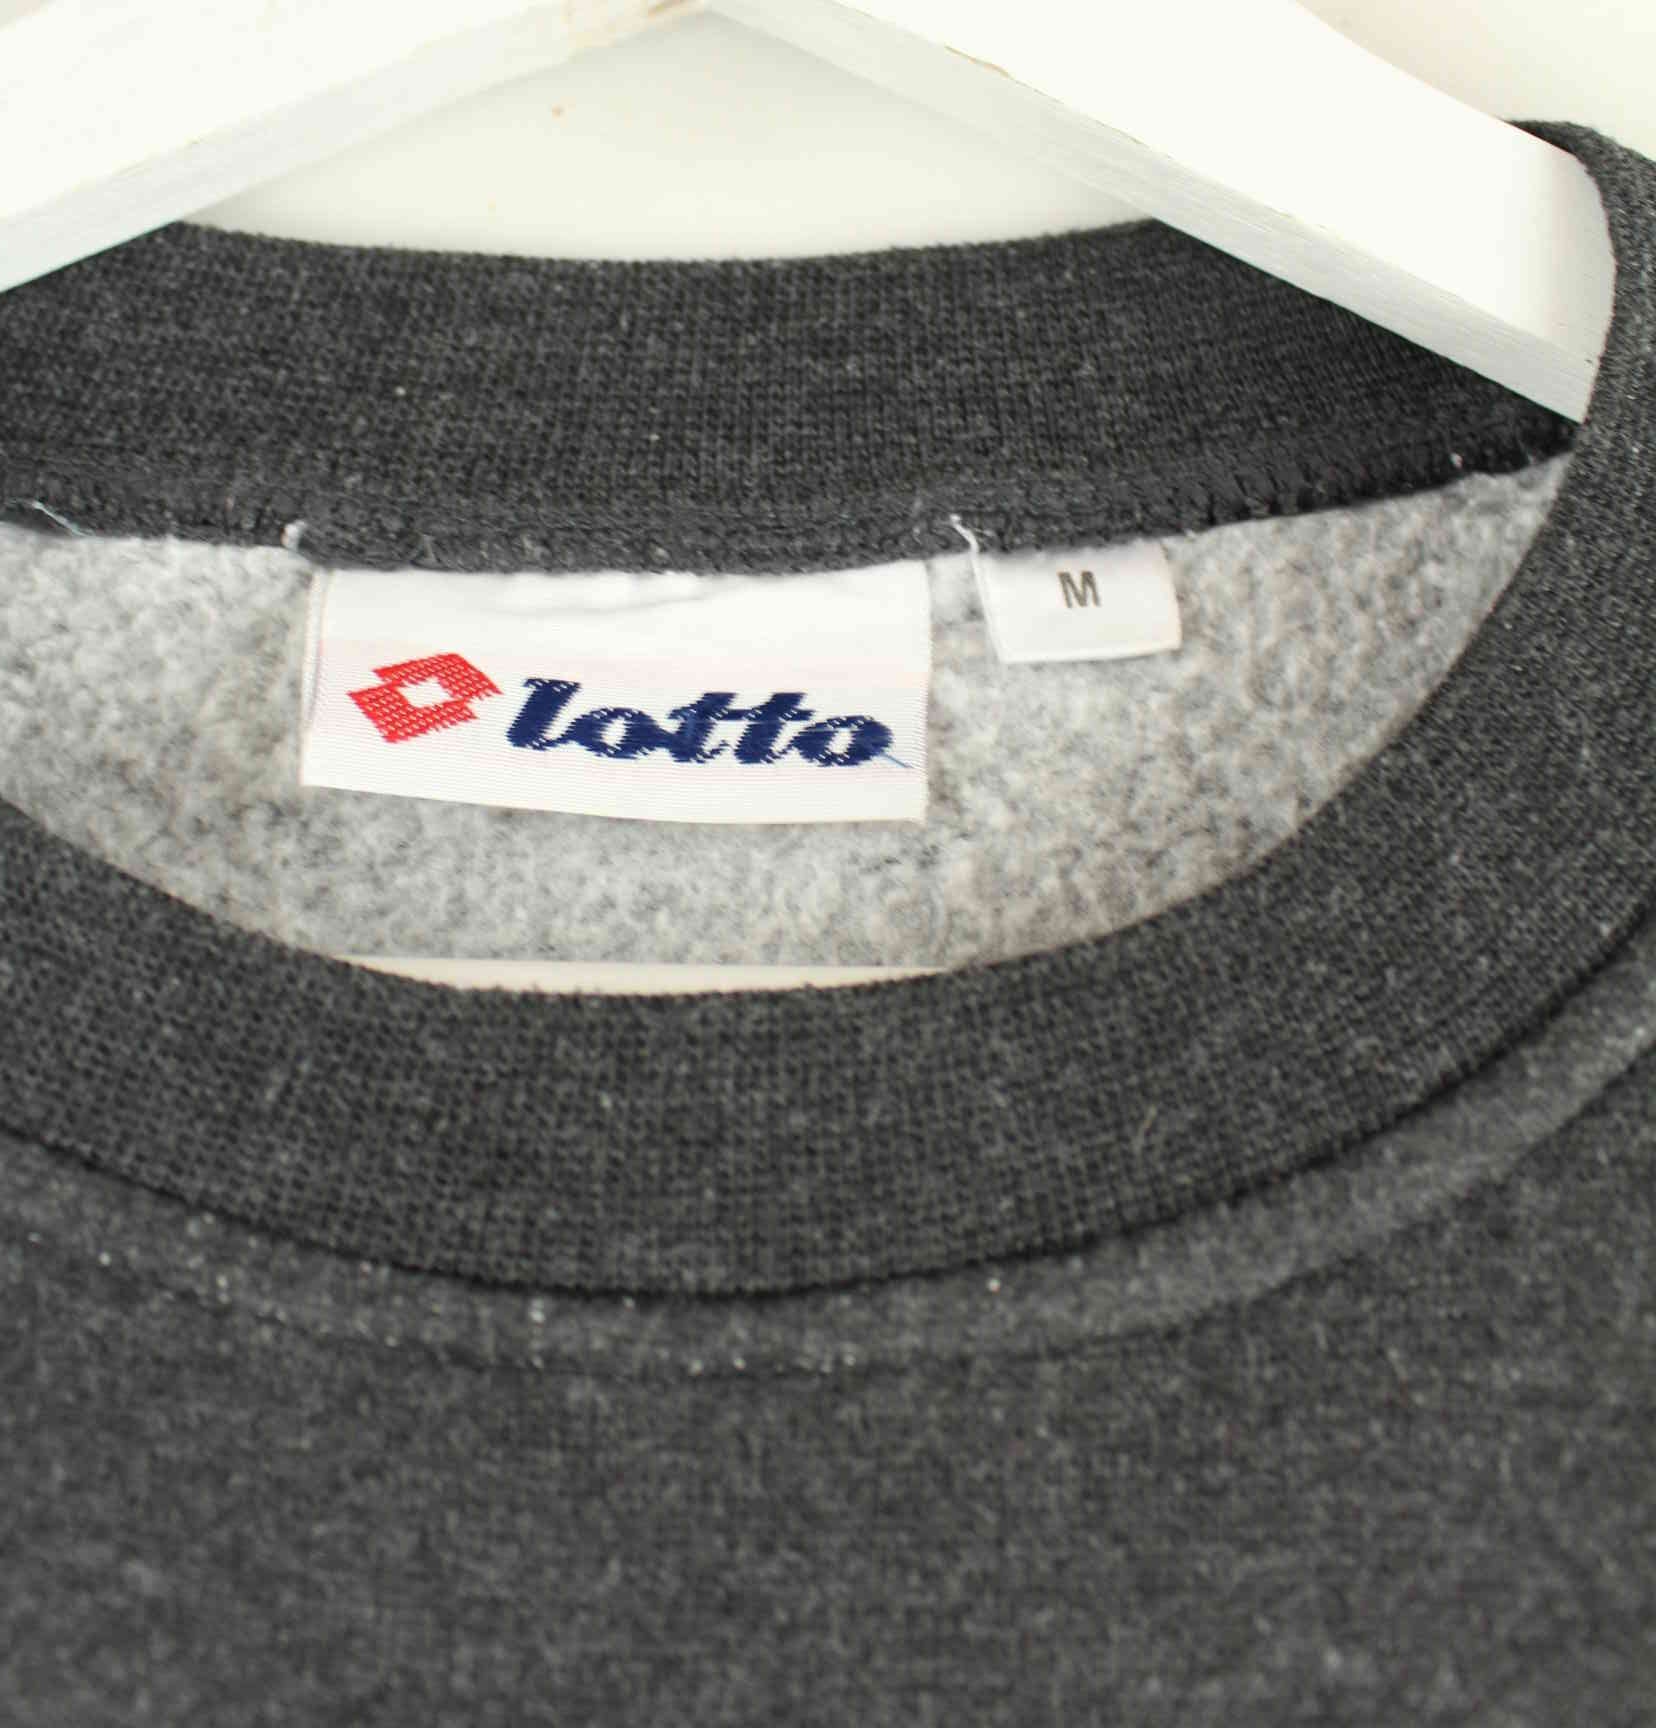 Lotto 90s Vintage Embroidered Sweater Grau M (detail image 2)